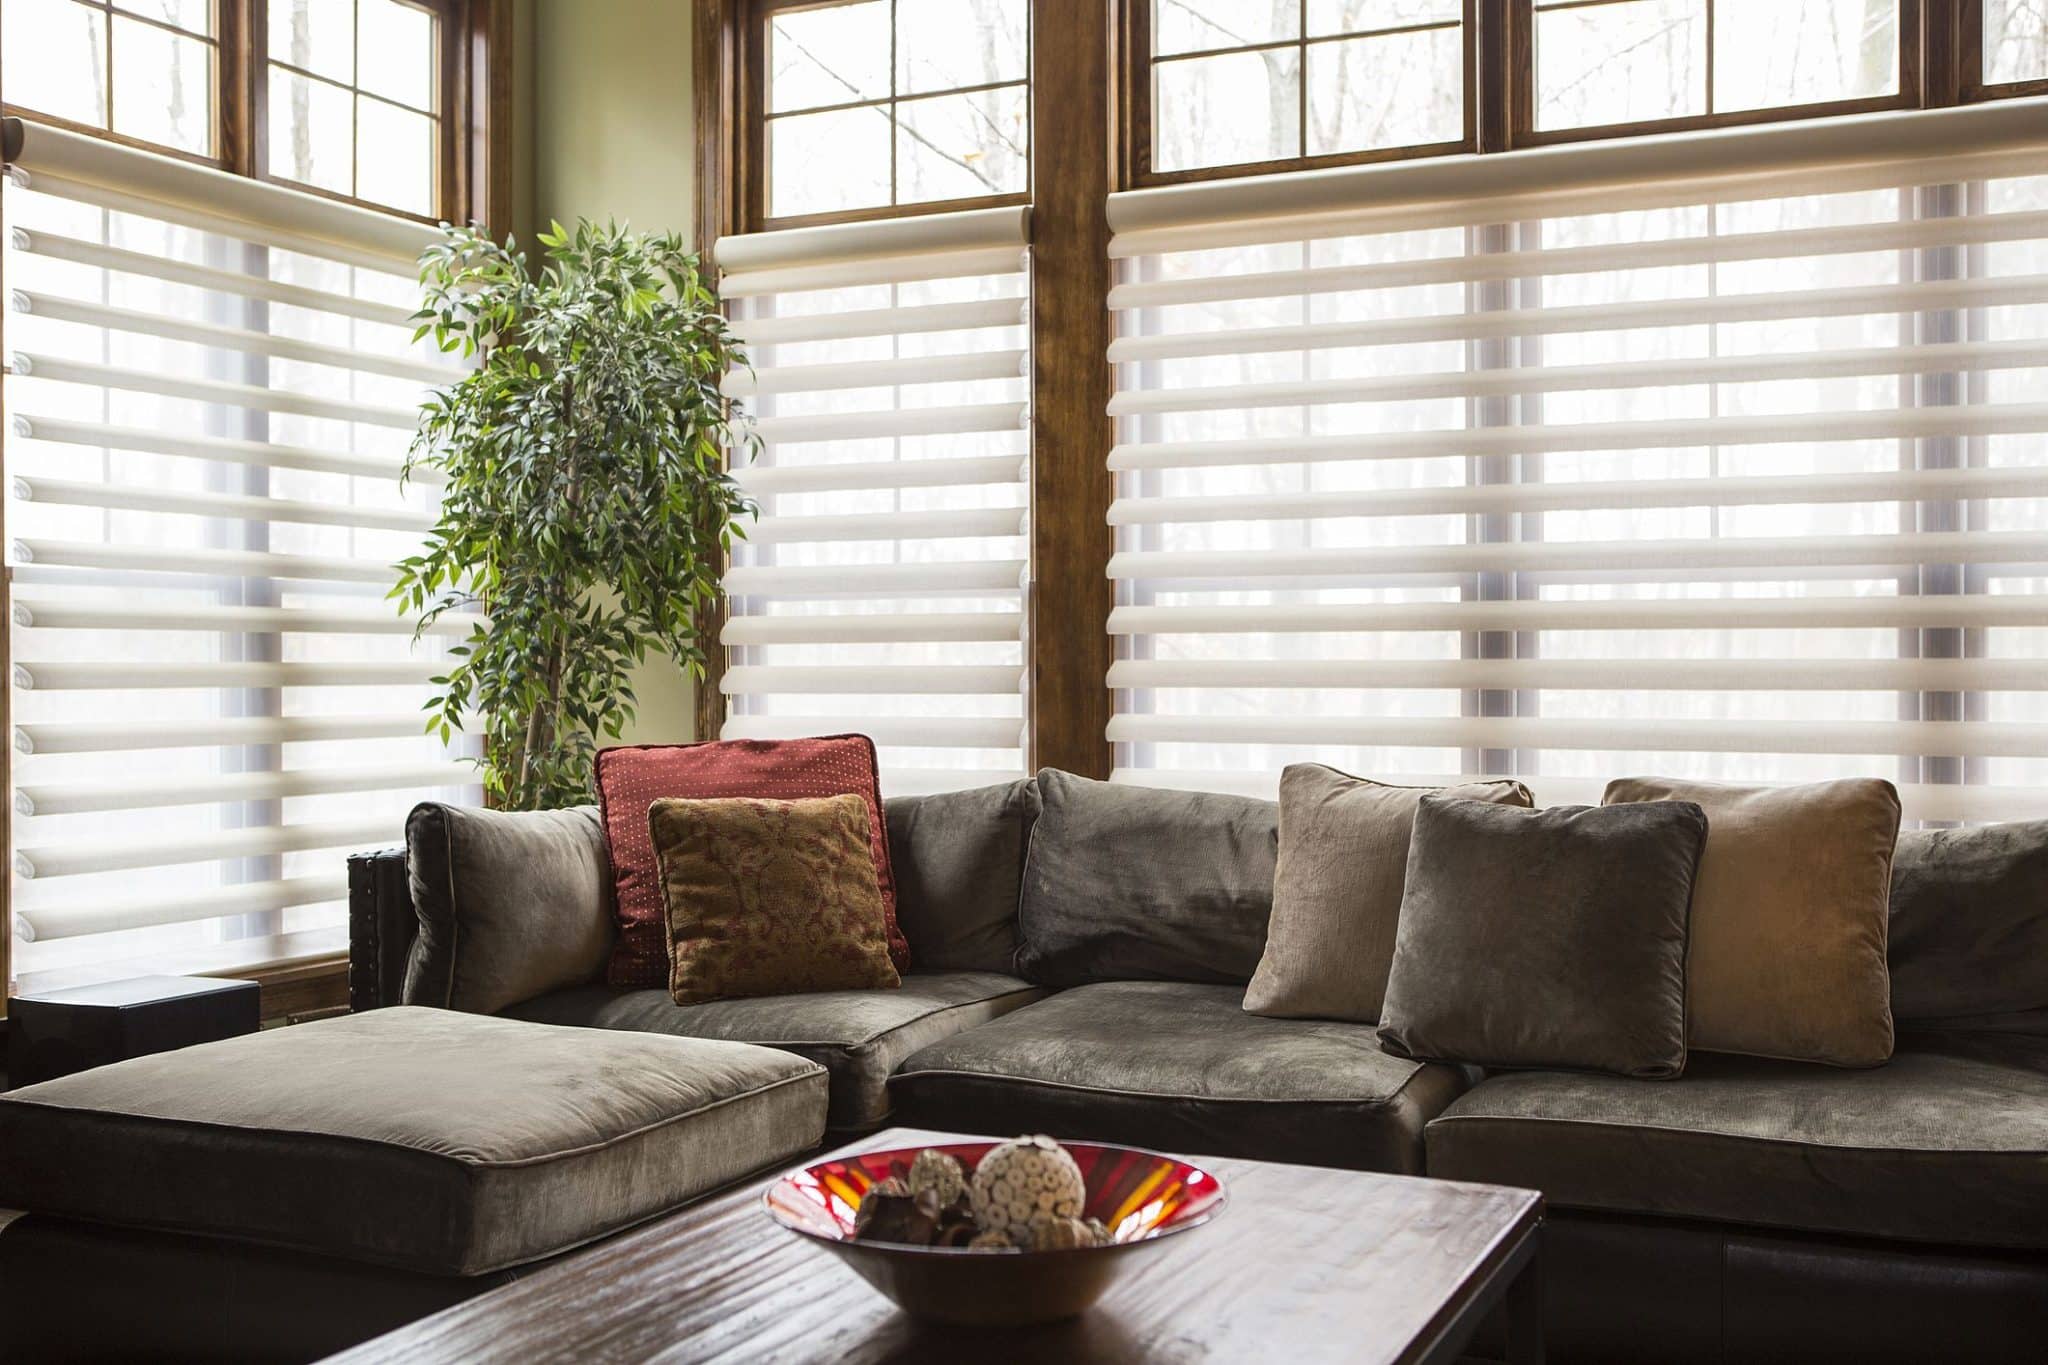 Window Blinds for Different Room Types: Living Rooms, Bedrooms, and Bathrooms